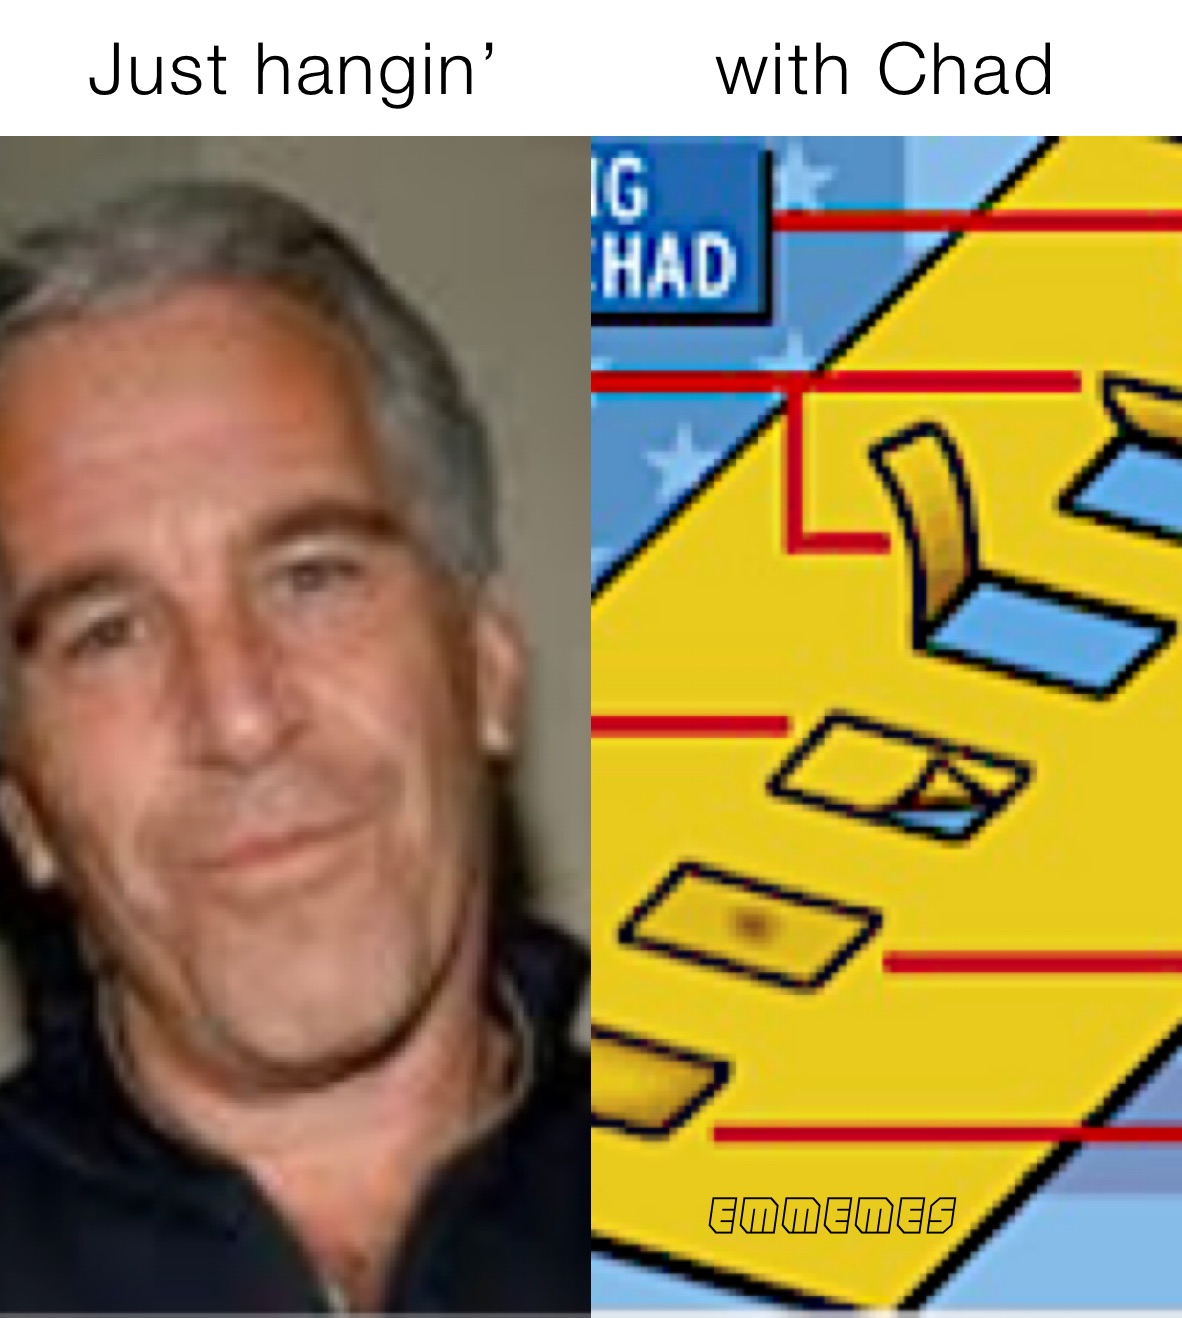 Just hangin’ with Chad